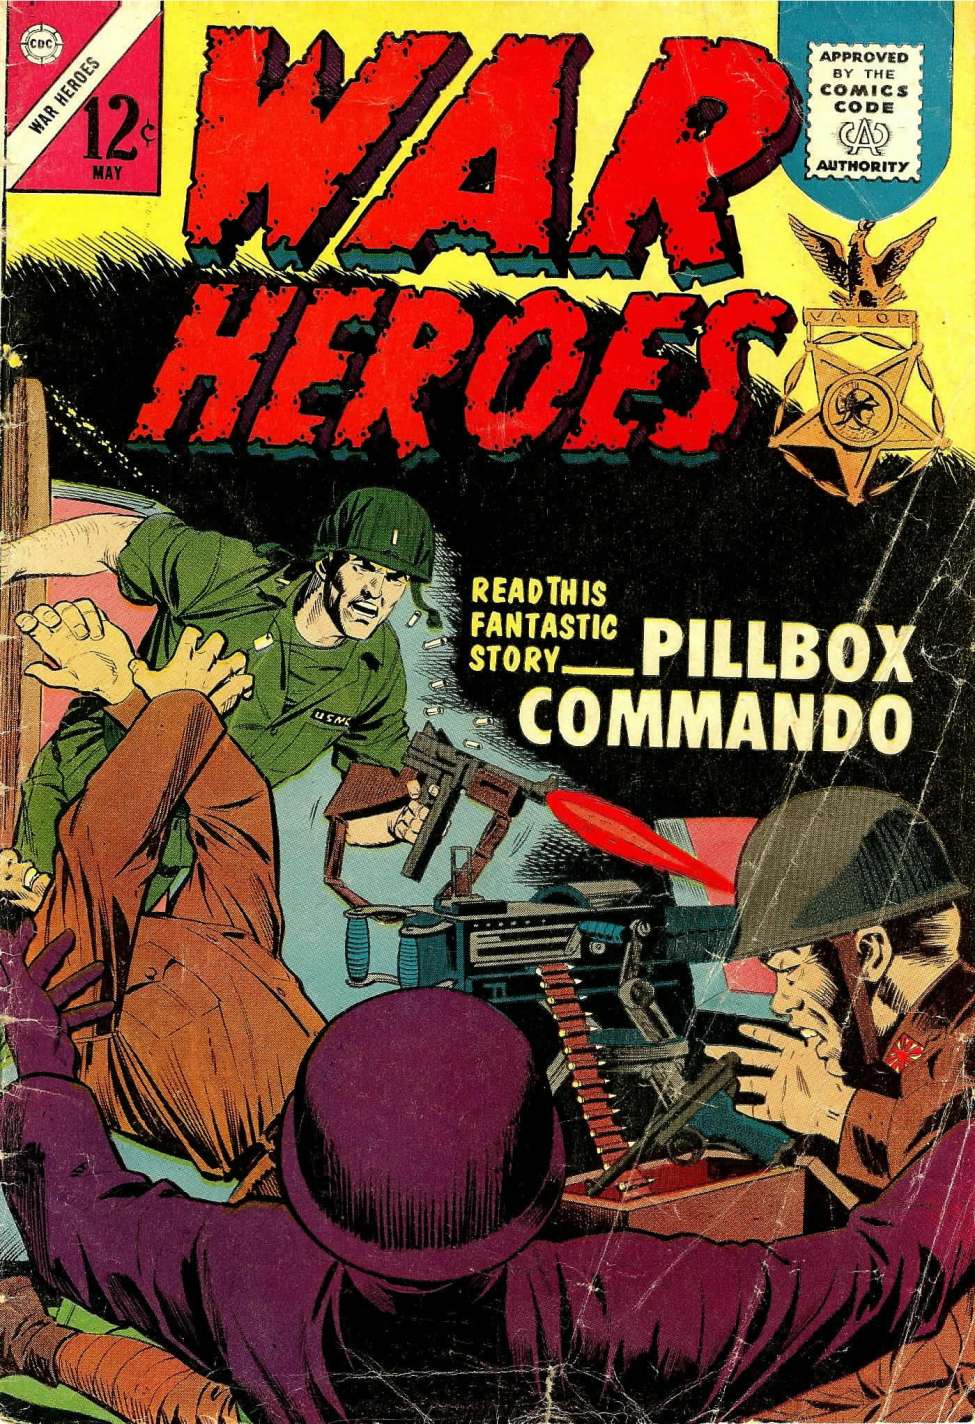 Comic Book Cover For War Heroes 8